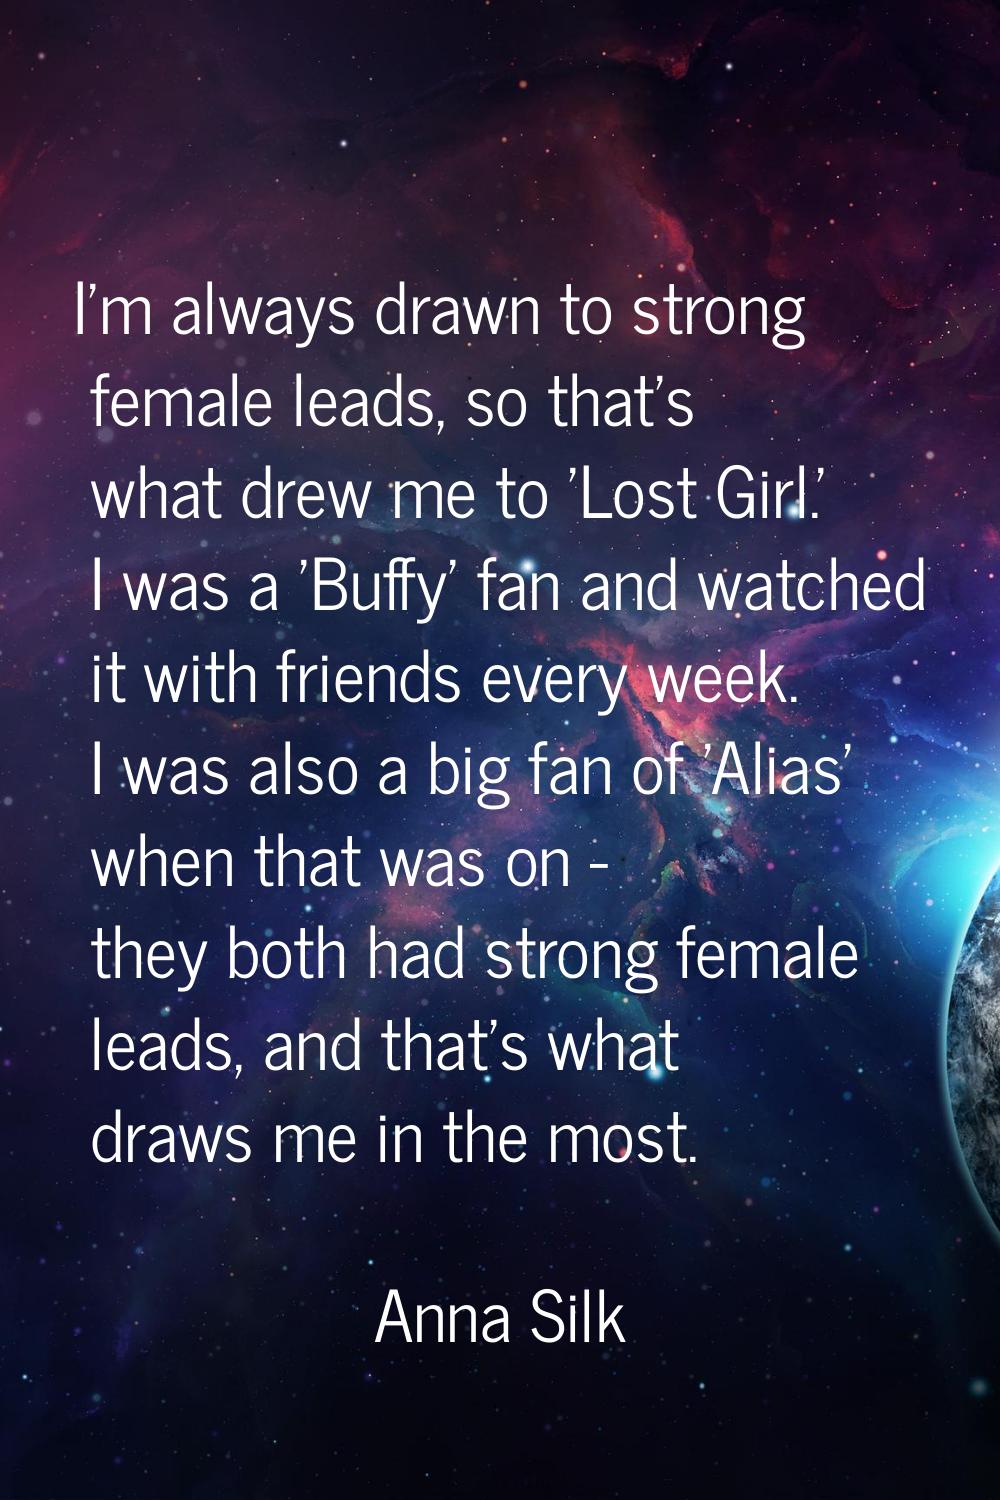 I'm always drawn to strong female leads, so that's what drew me to 'Lost Girl.' I was a 'Buffy' fan